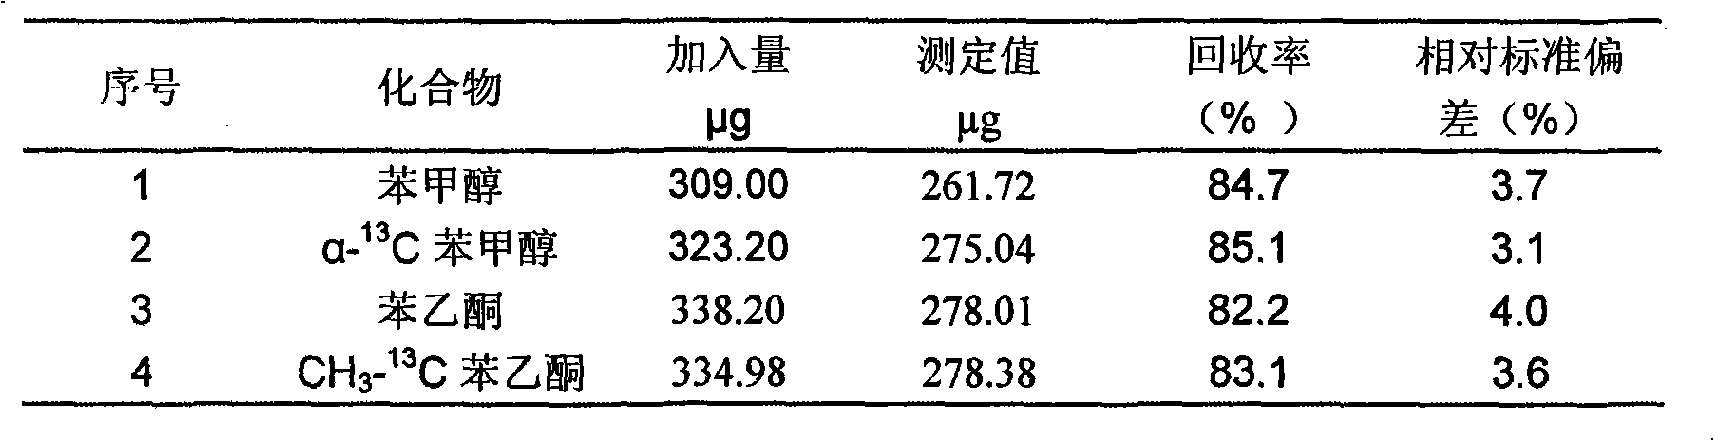 Method for measuring transfer action index of 13C marked perfume monomer and normal perfume monomer in cigarette